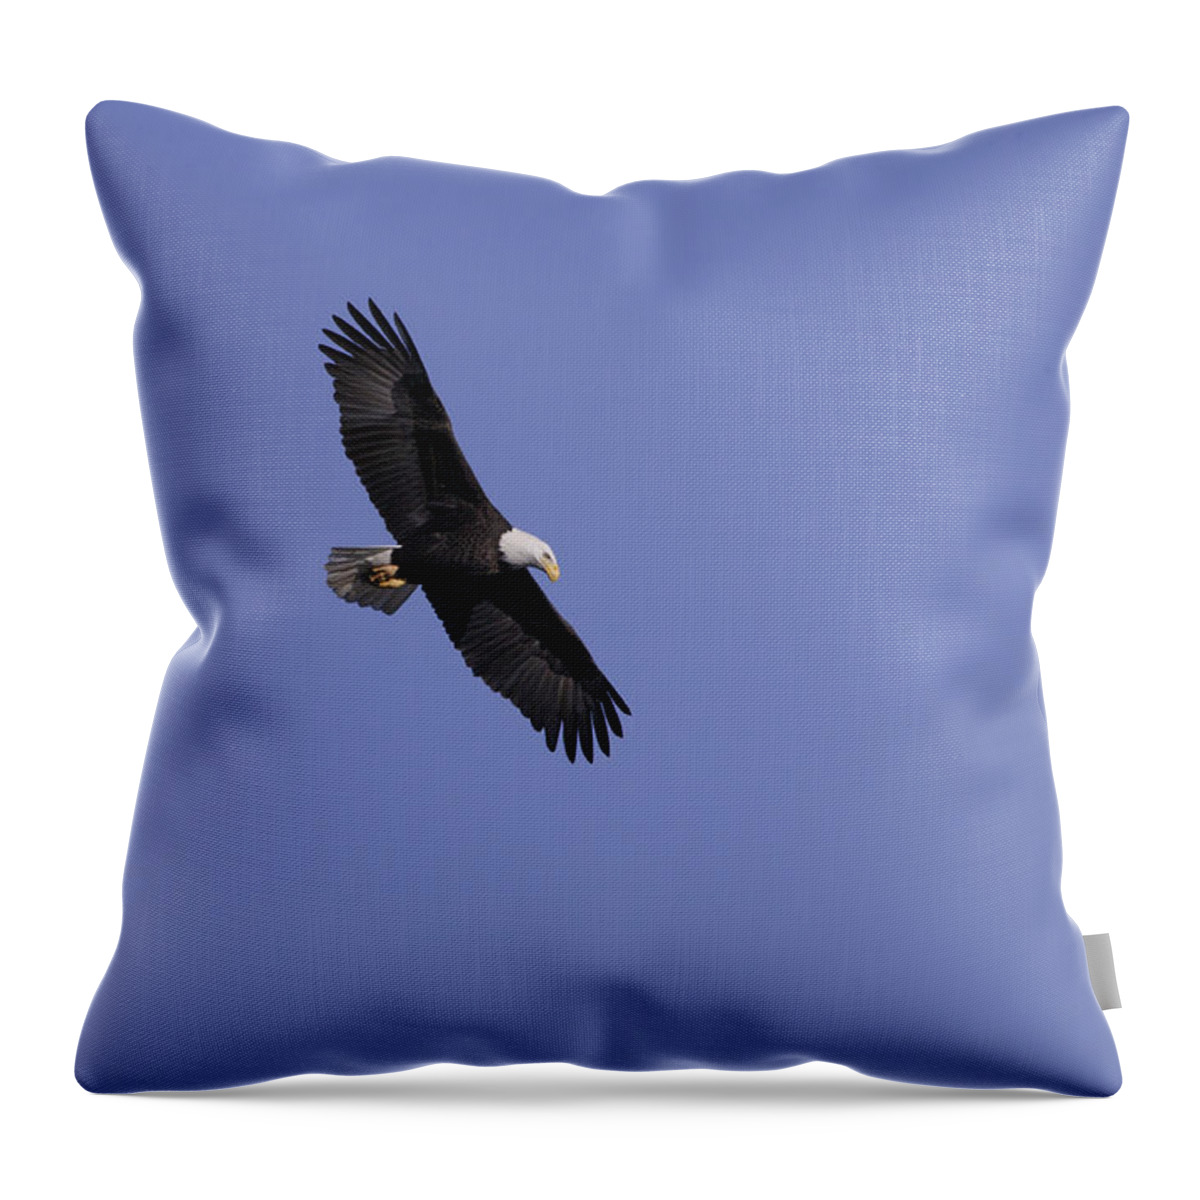 Eagle Throw Pillow featuring the photograph Watching by Mykel Davis